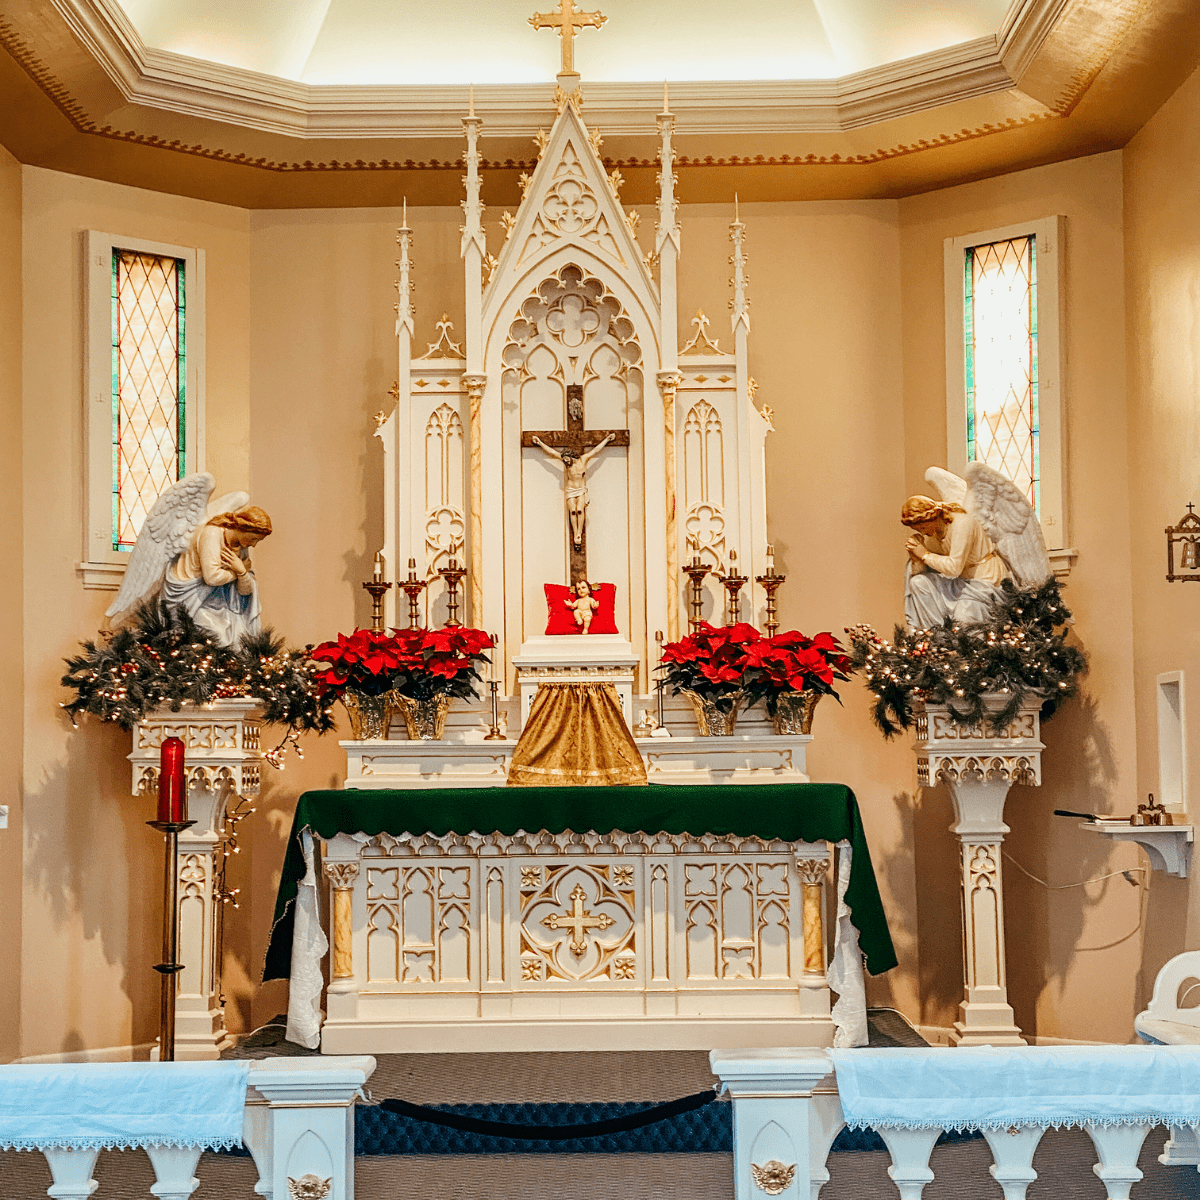 traditional catholic altar decorated for Christmas